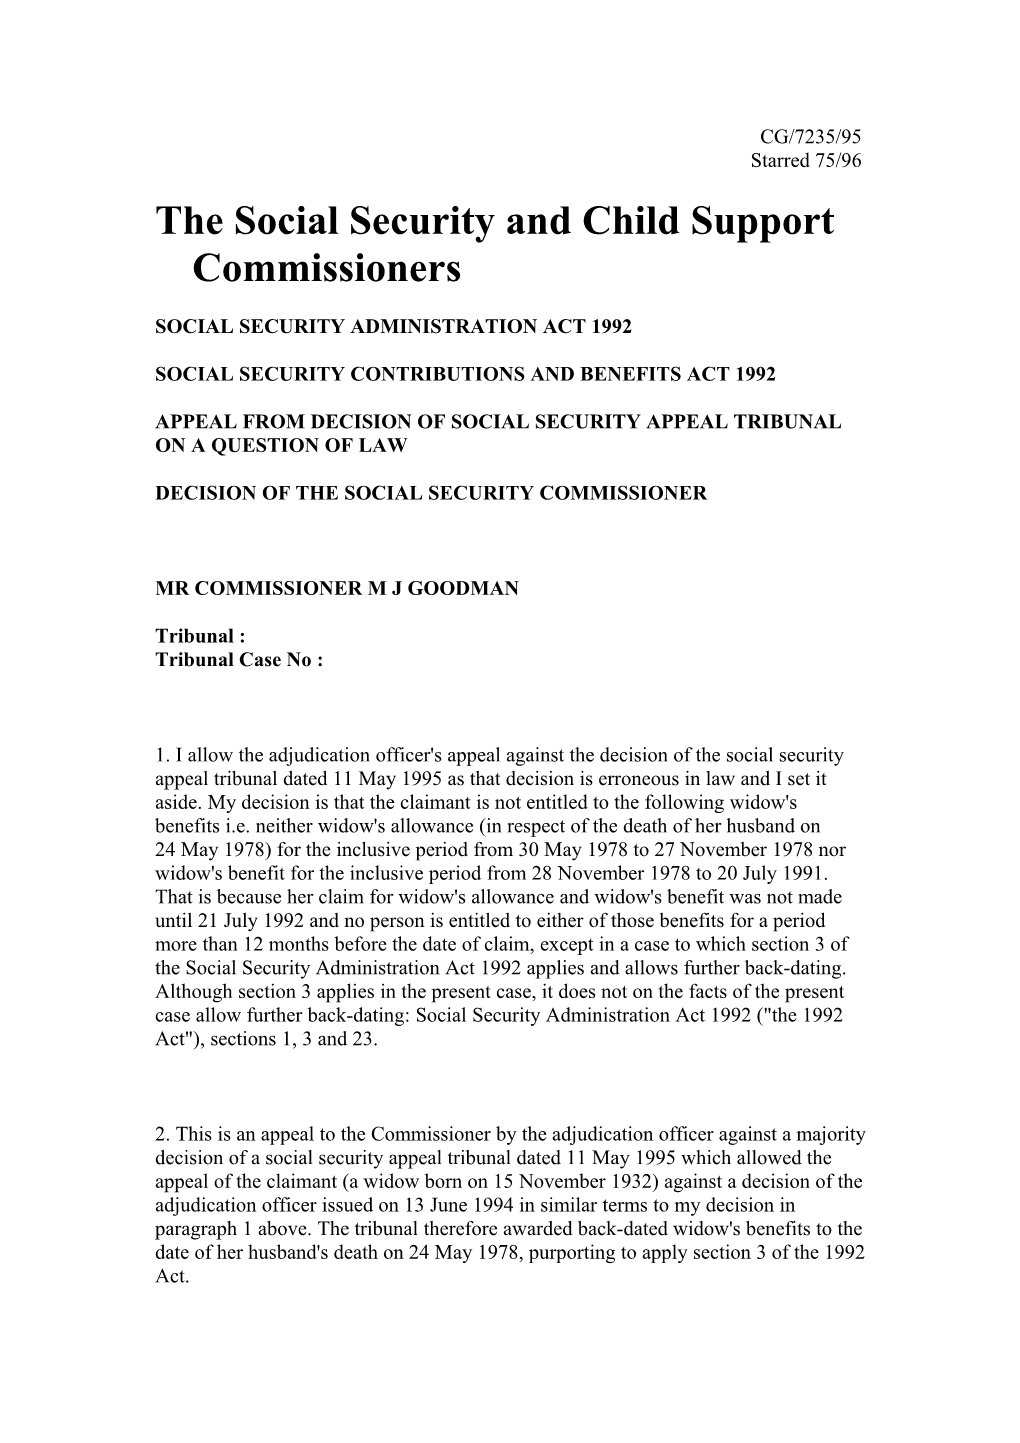 The Social Security and Child Support Commissioners s2